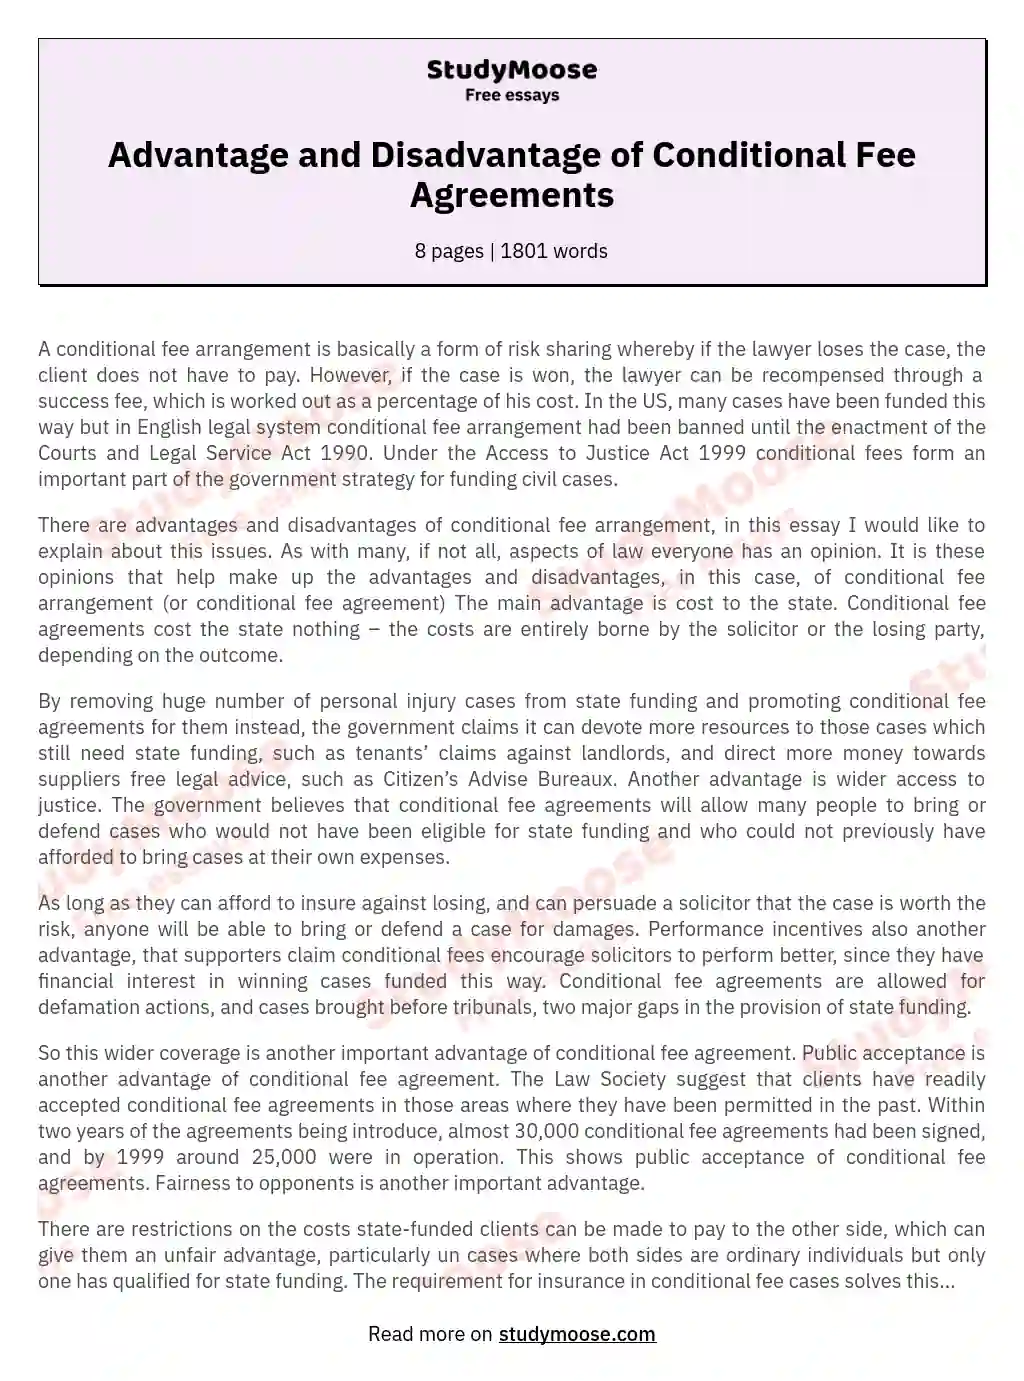 Advantage and Disadvantage of Conditional Fee Agreements essay